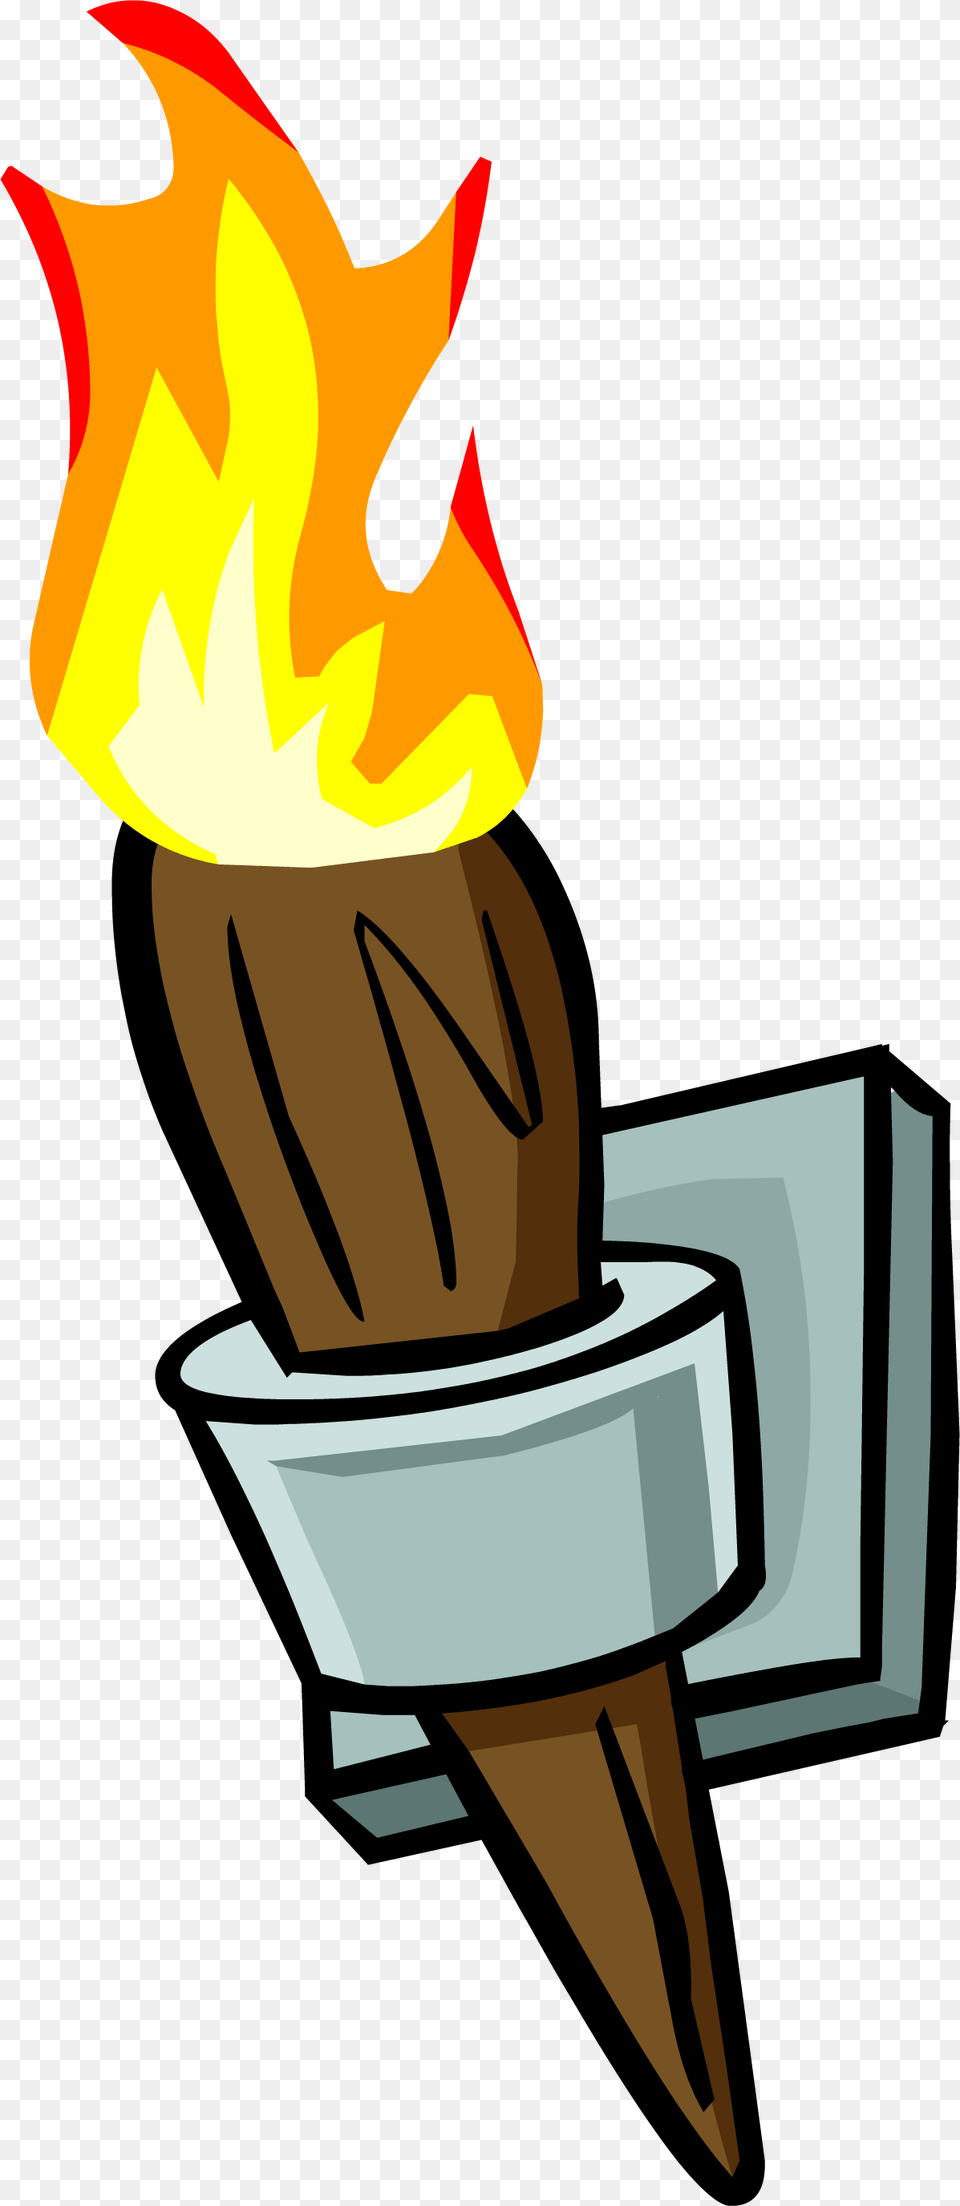 Light, Torch Png Image